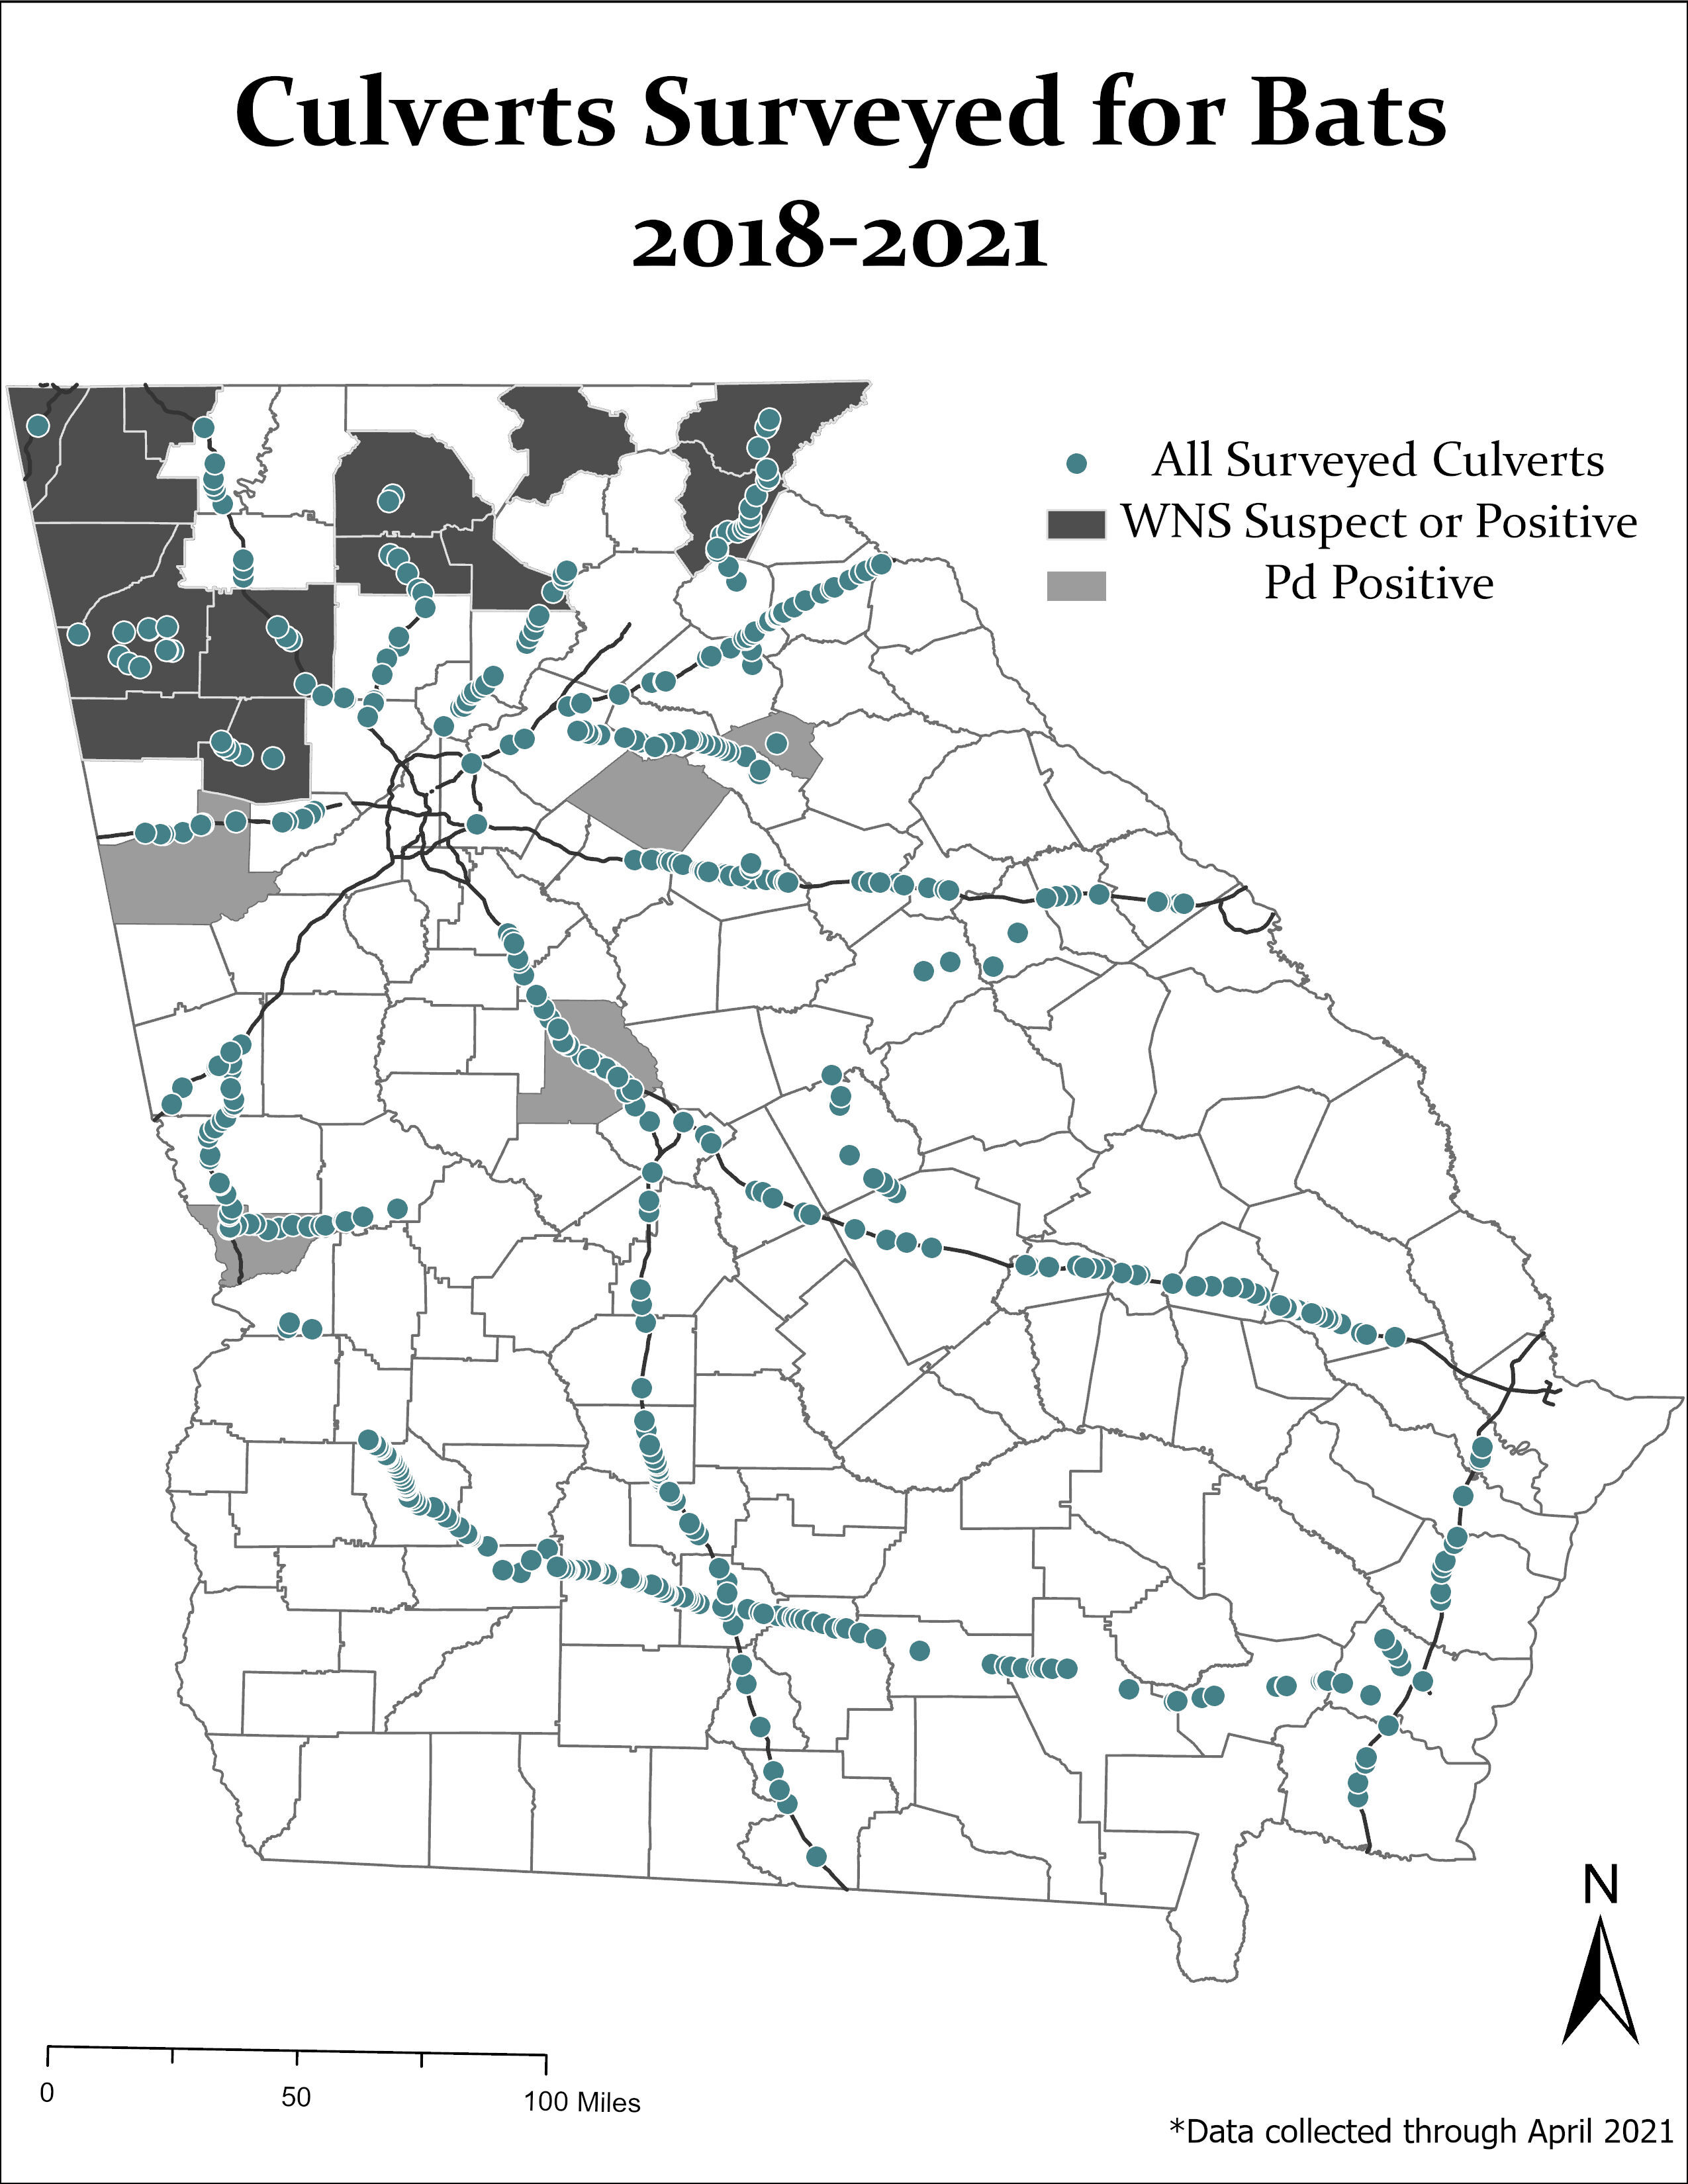 "white nose syndrome detection in bats in culverts survey in 2021 "